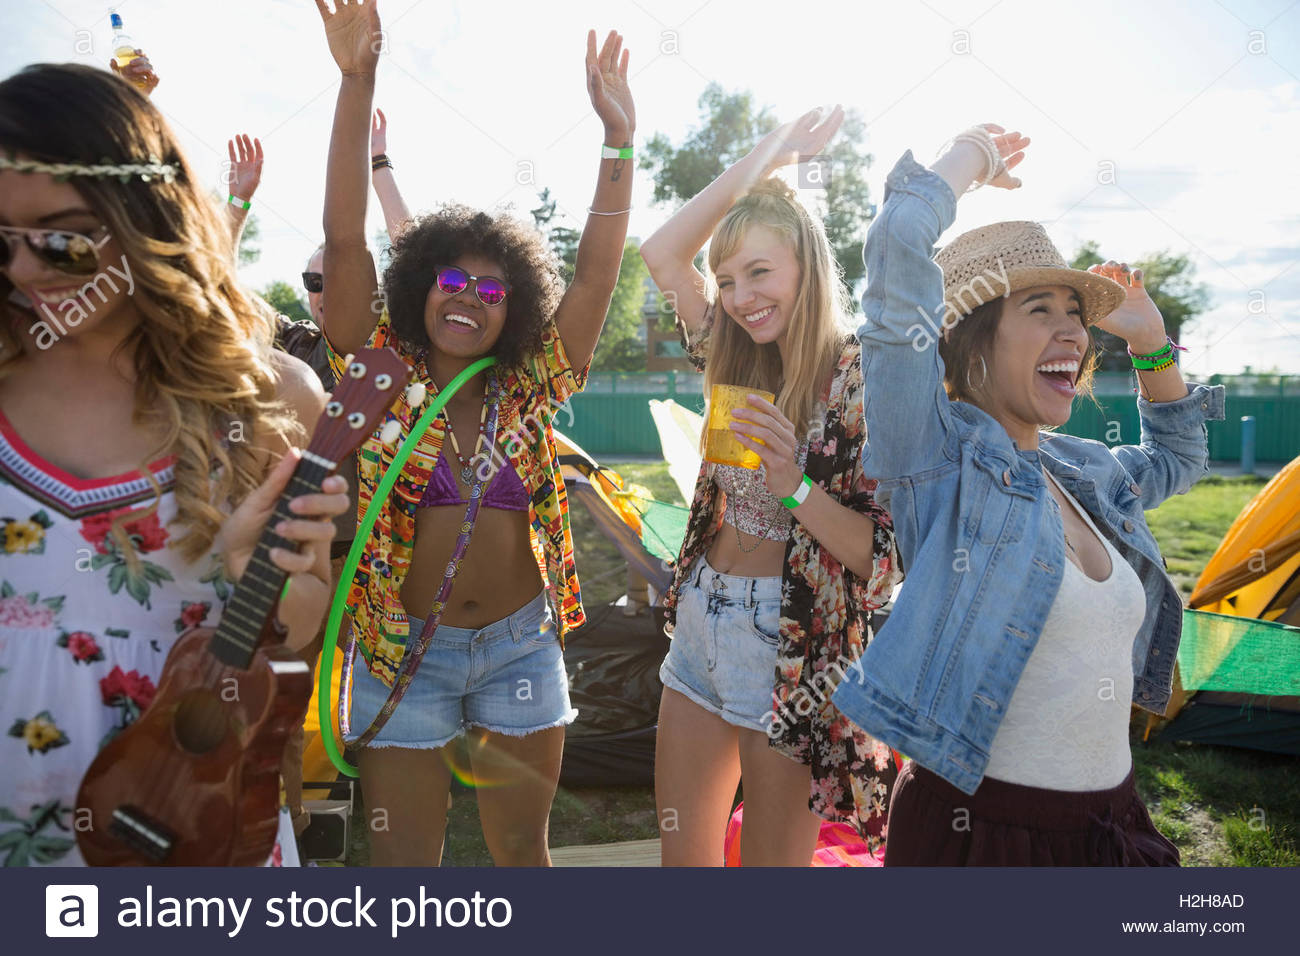 Enthusiastic young women dancing at summer music festival Stock Photo